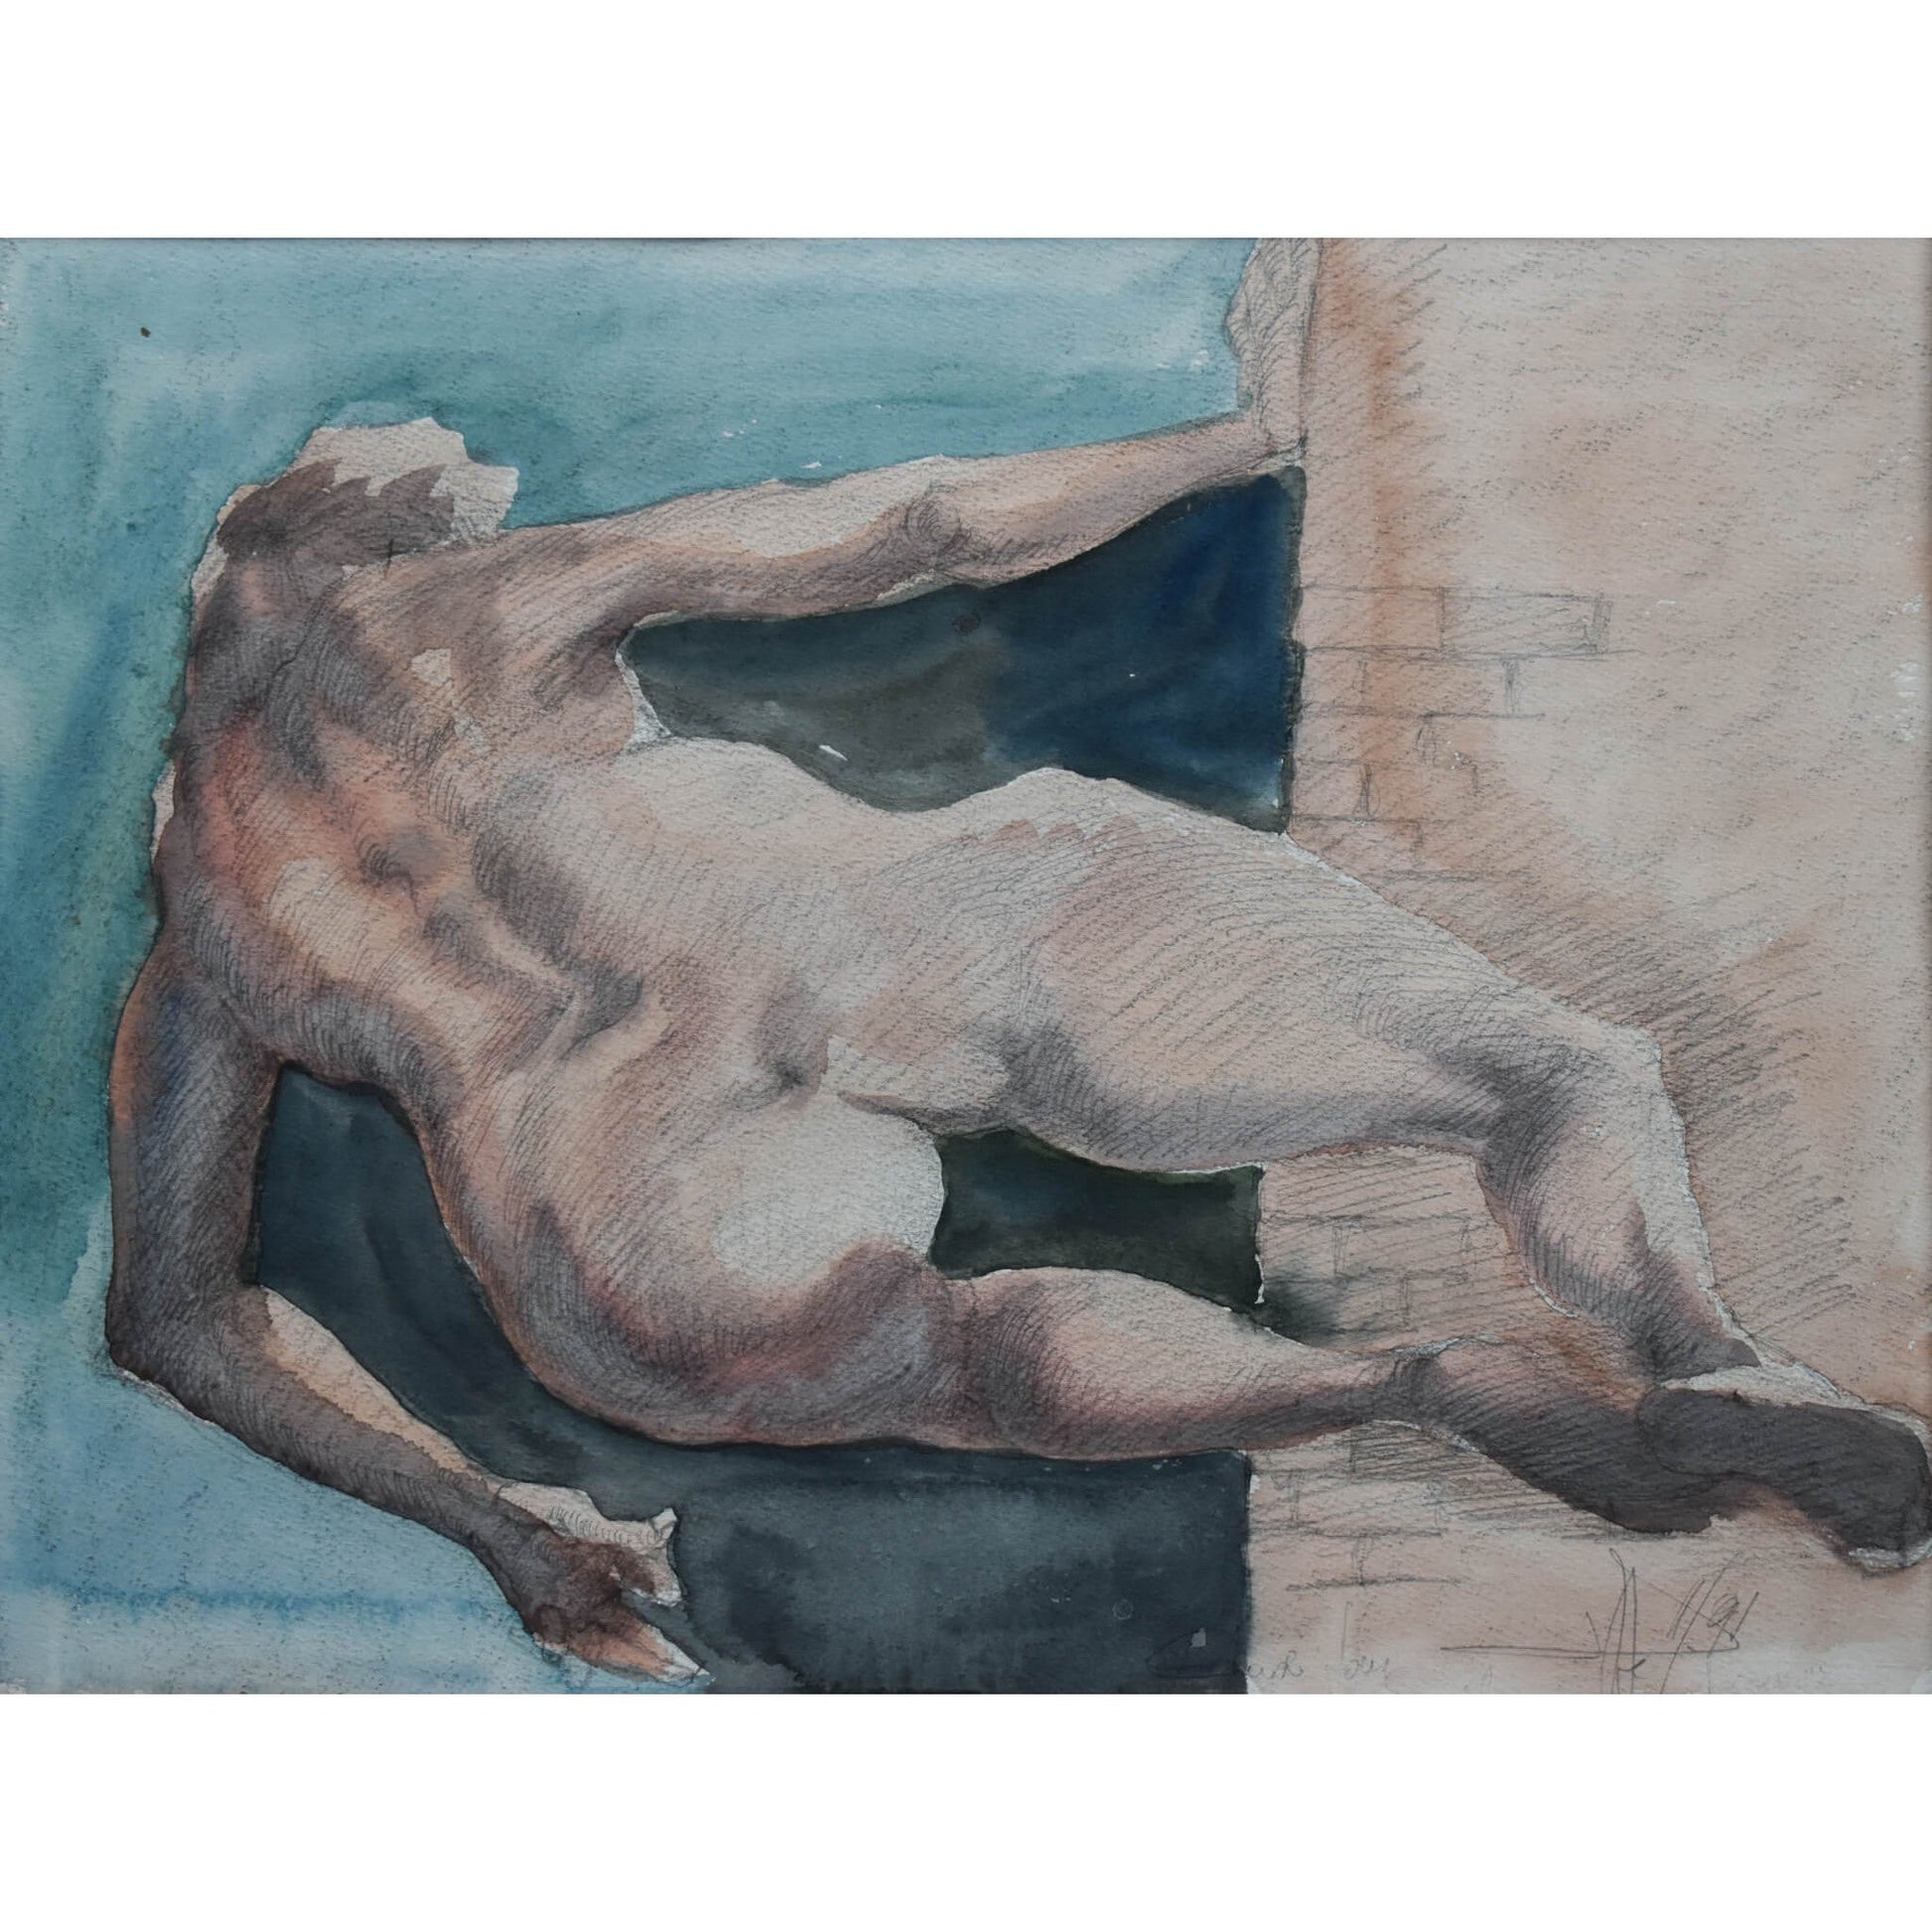 Modern painting watercolour nude figure 1991 expressionist art by Roger Coppe for sale at Winckelmann Gallery